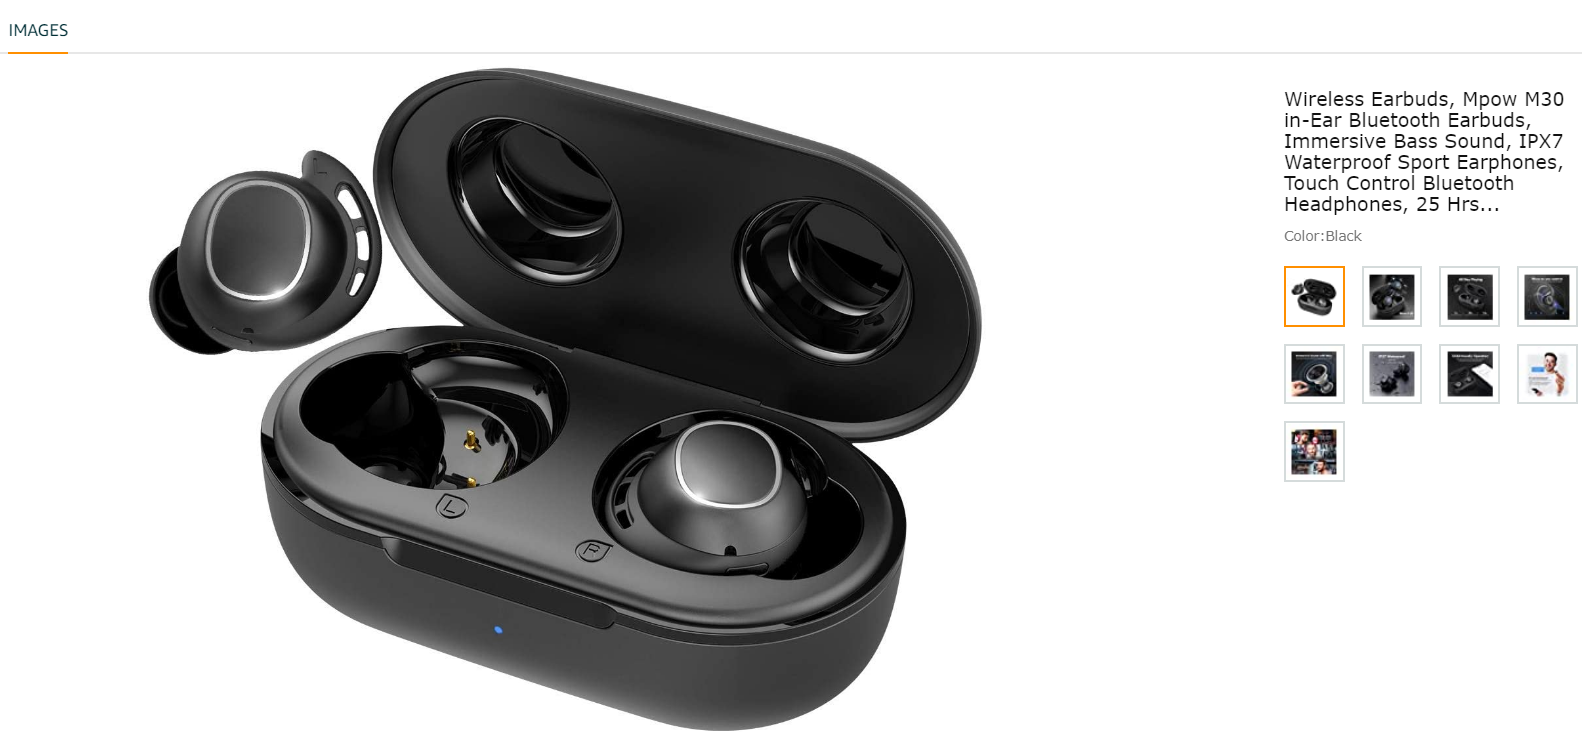 bluetooth earphones high quality image example